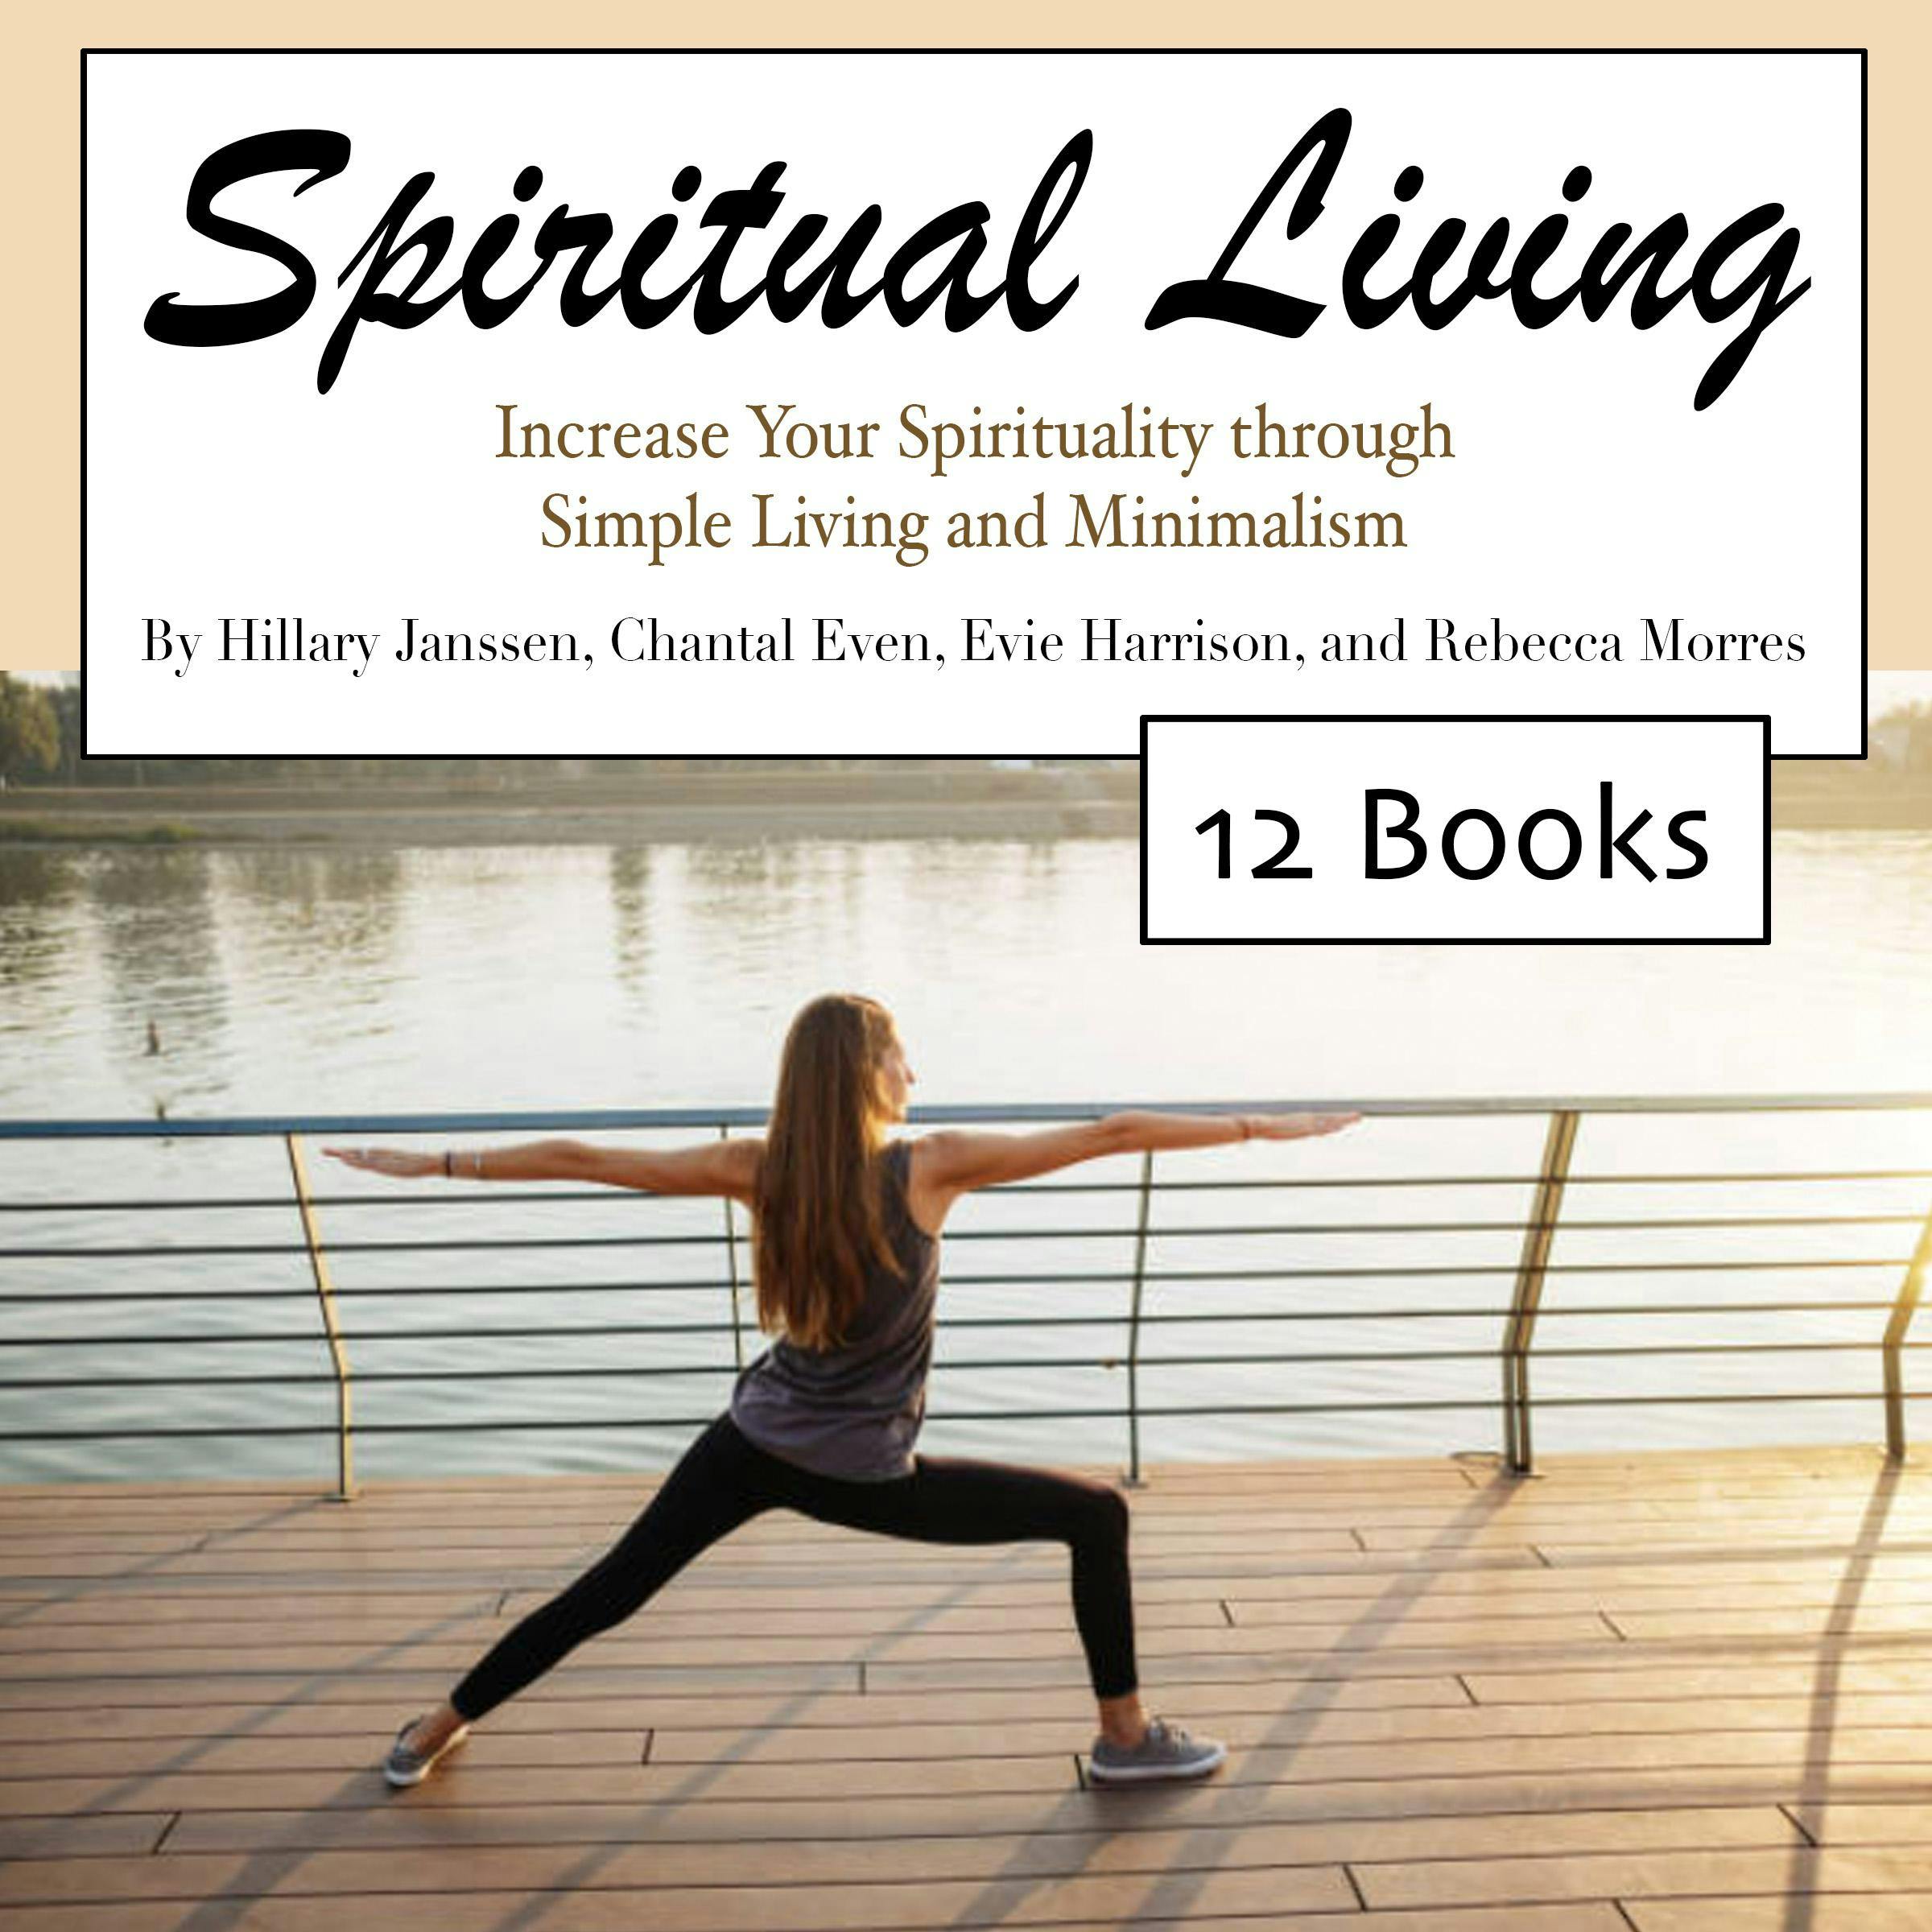 Spiritual Living: Increase Your Spirituality through Simple Living and Minimalism - Rebecca Morres, Hillary Janssen, Chantal Even, Evie Harrison